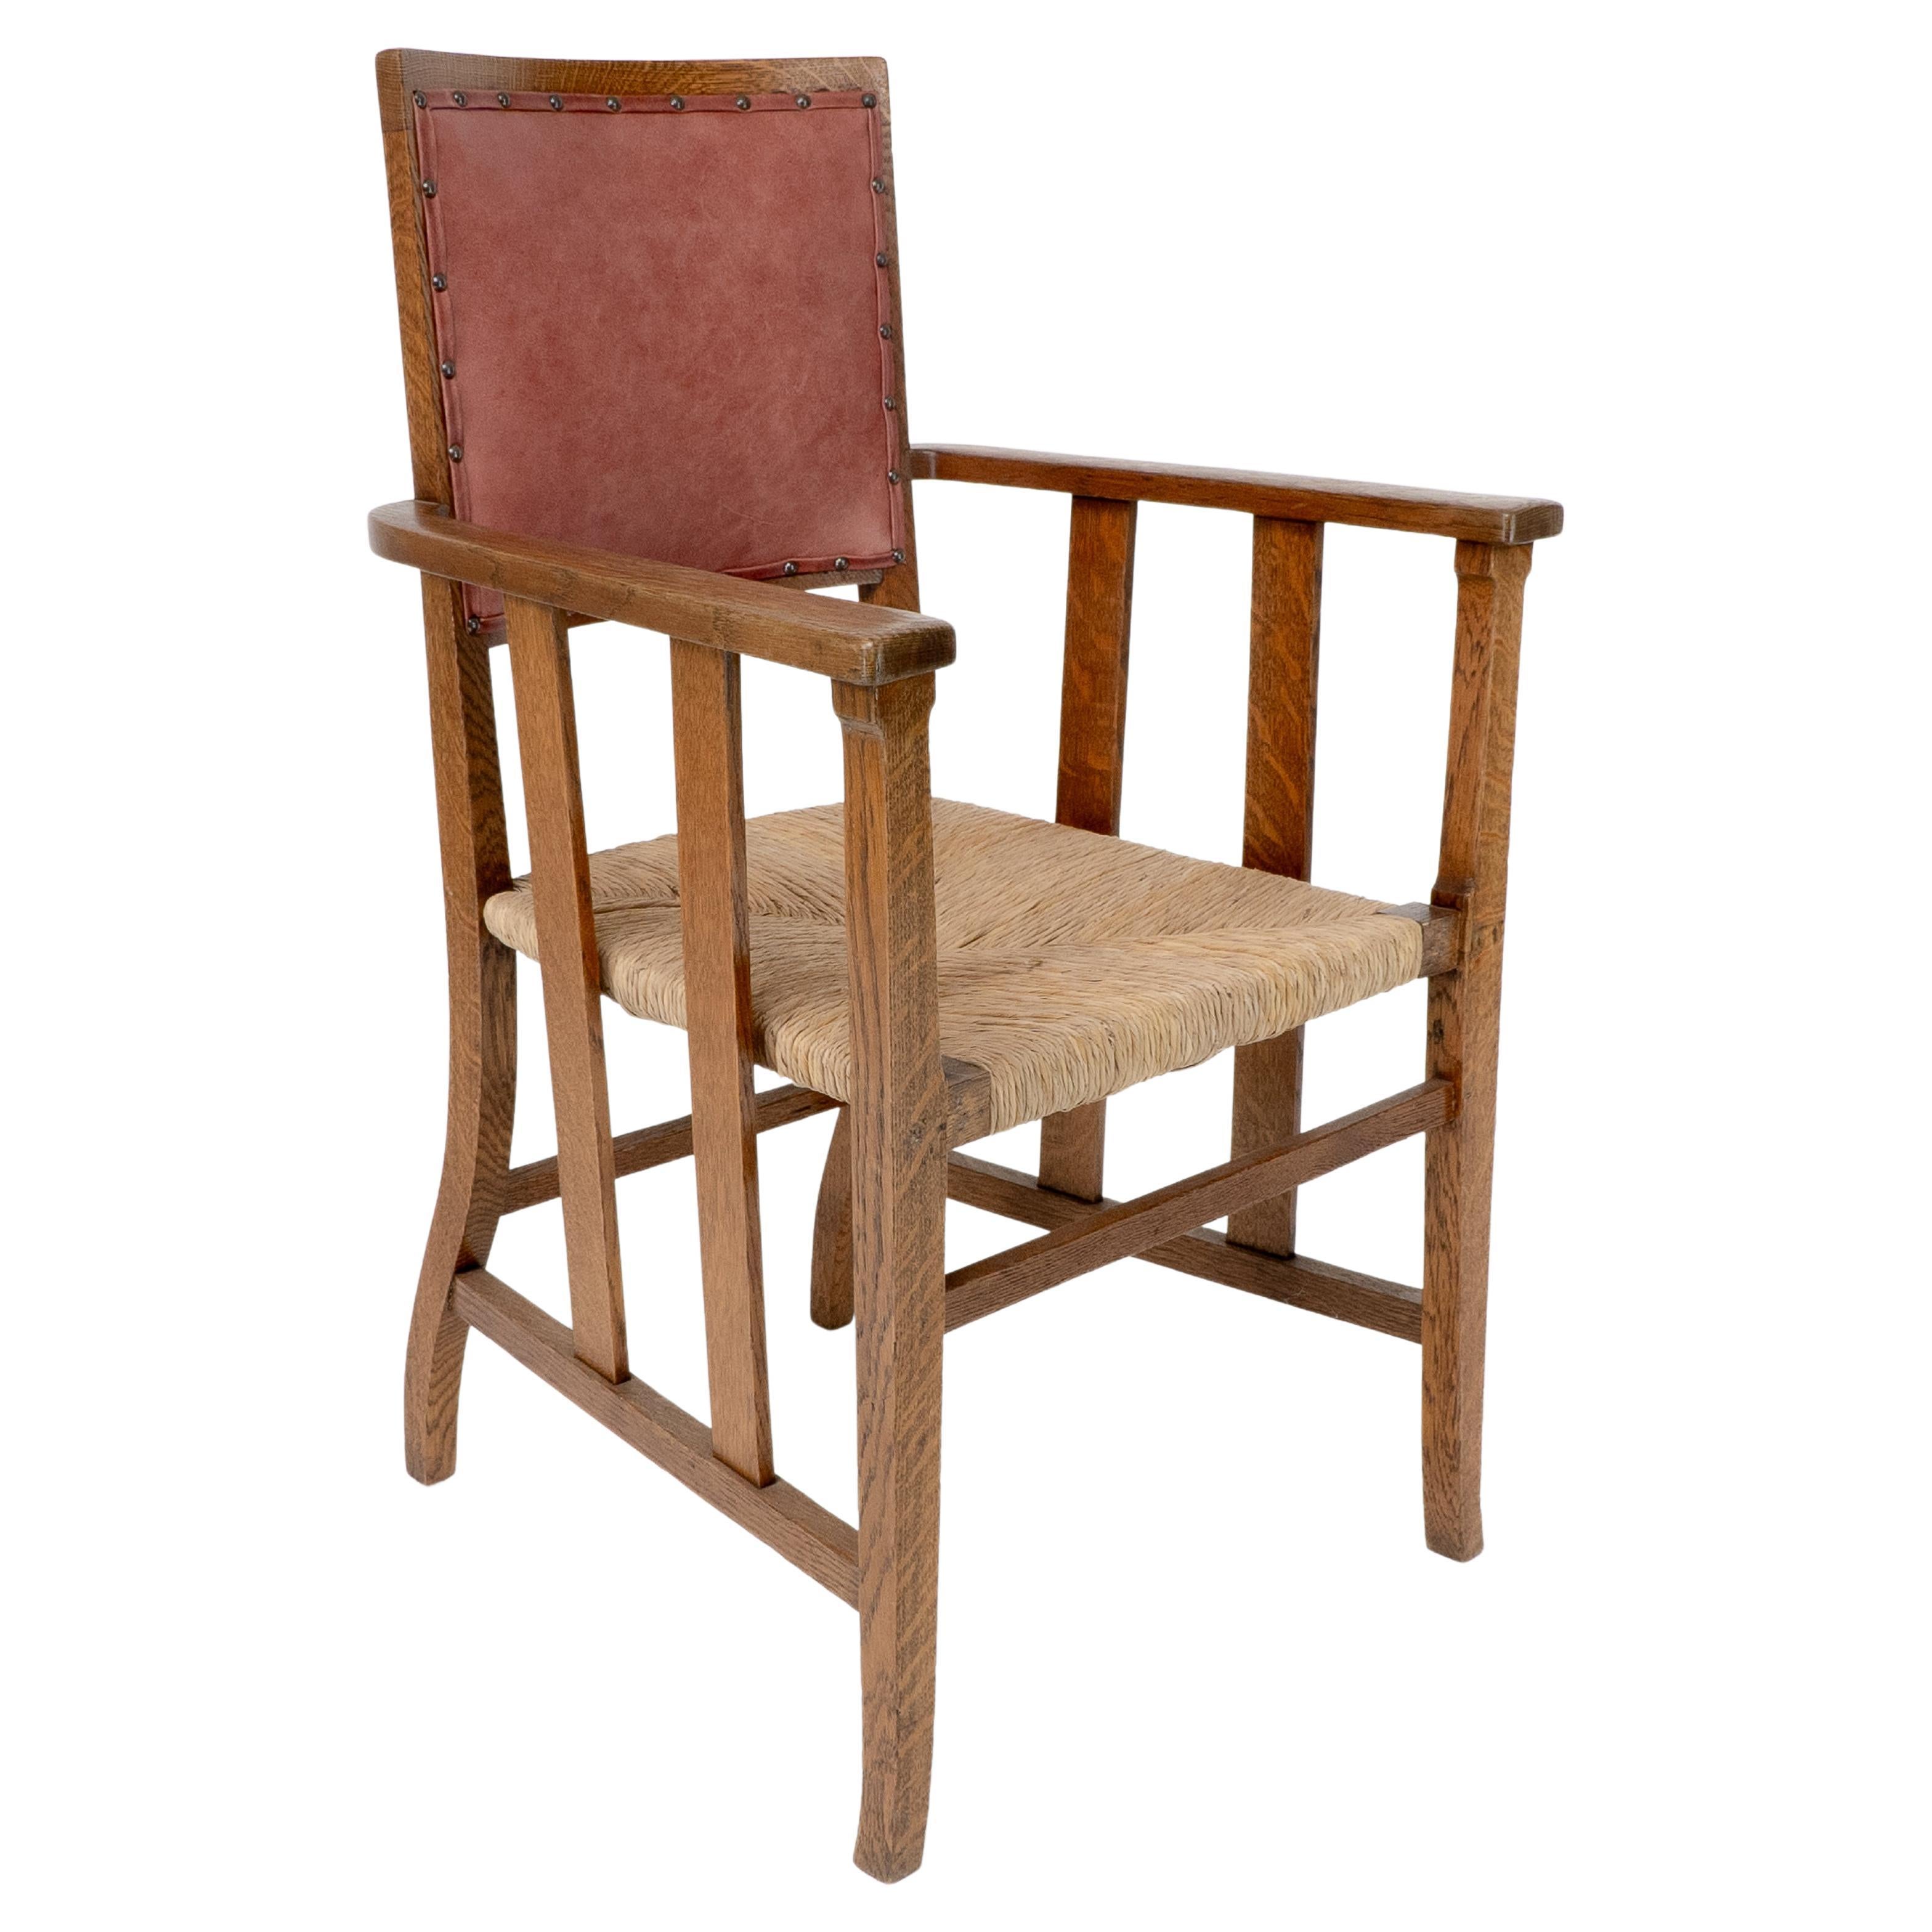 Liberty & Co. An Arts & Crafts rush seat armchair with a shaped back